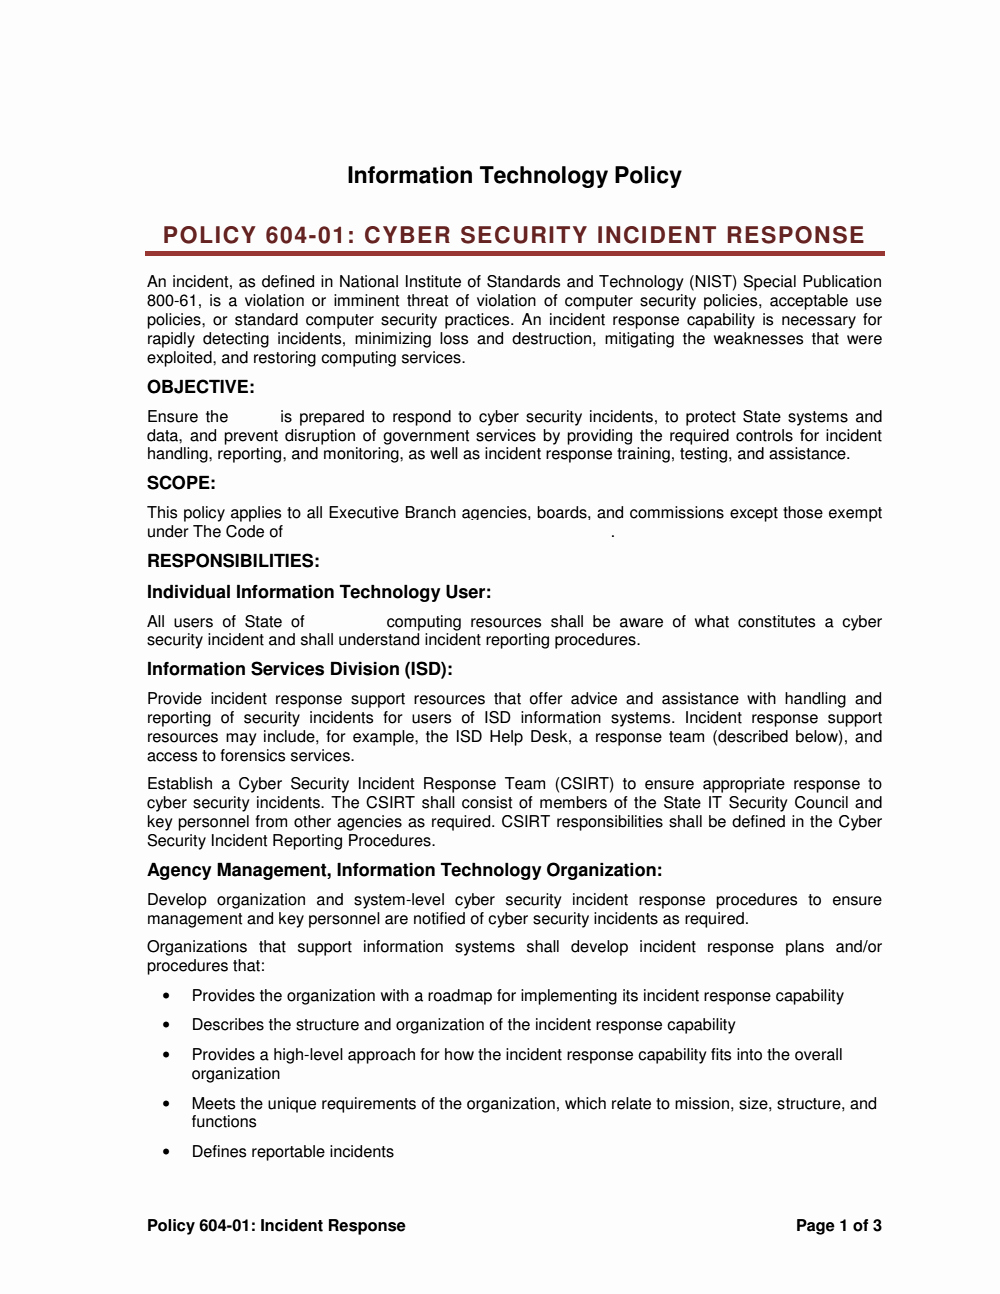 Cyber Security Incident Report Template Inspirational Incident Response Policy — Fbi